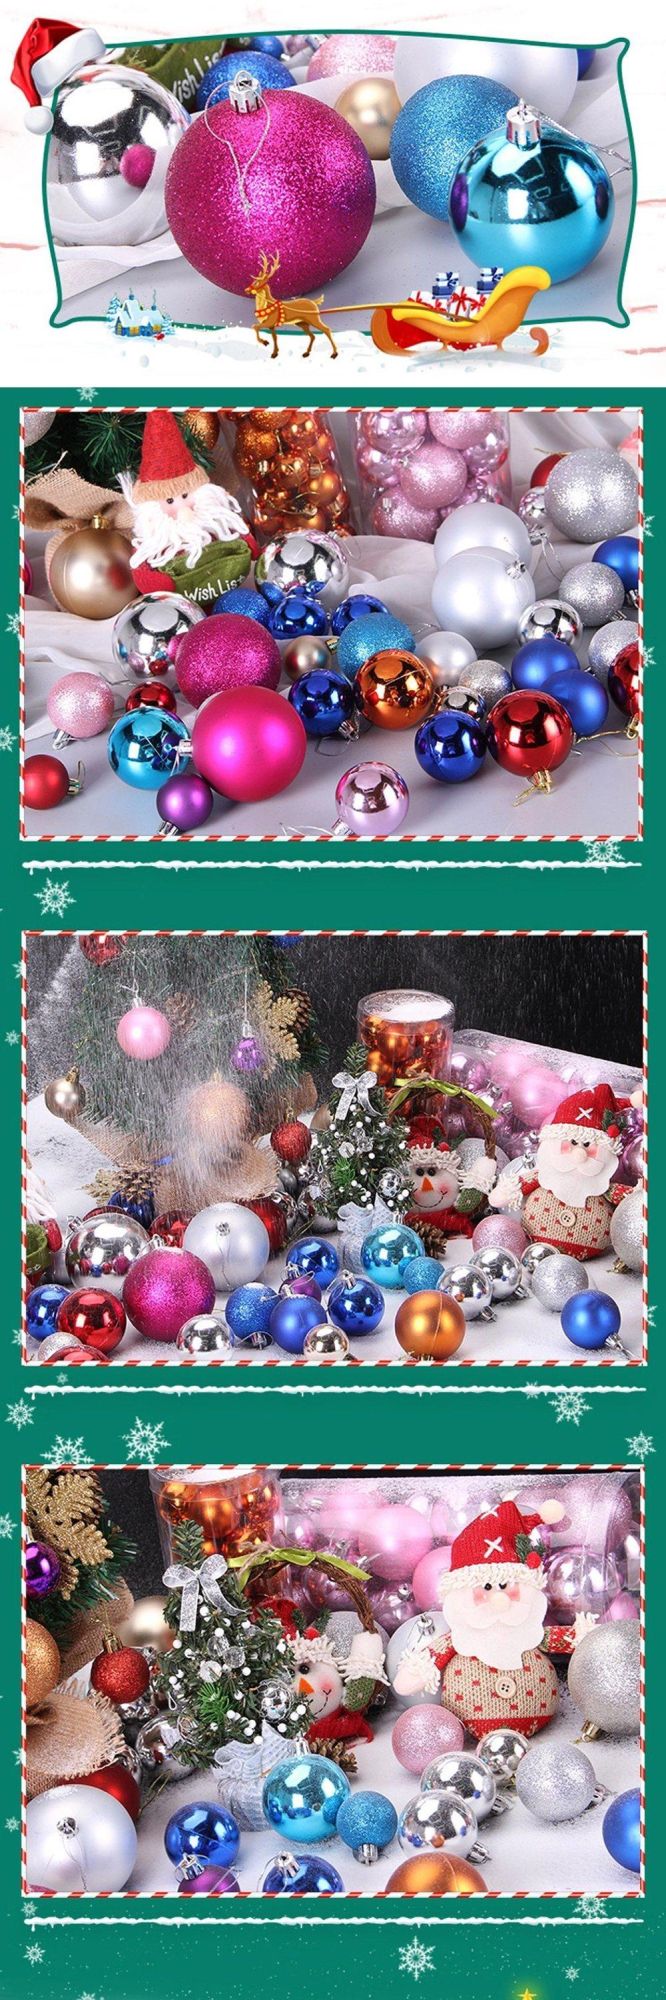 Colored Tree Hang Balls Decor Wholesale Clear Plastic Decorations Ornaments Christmas Ball